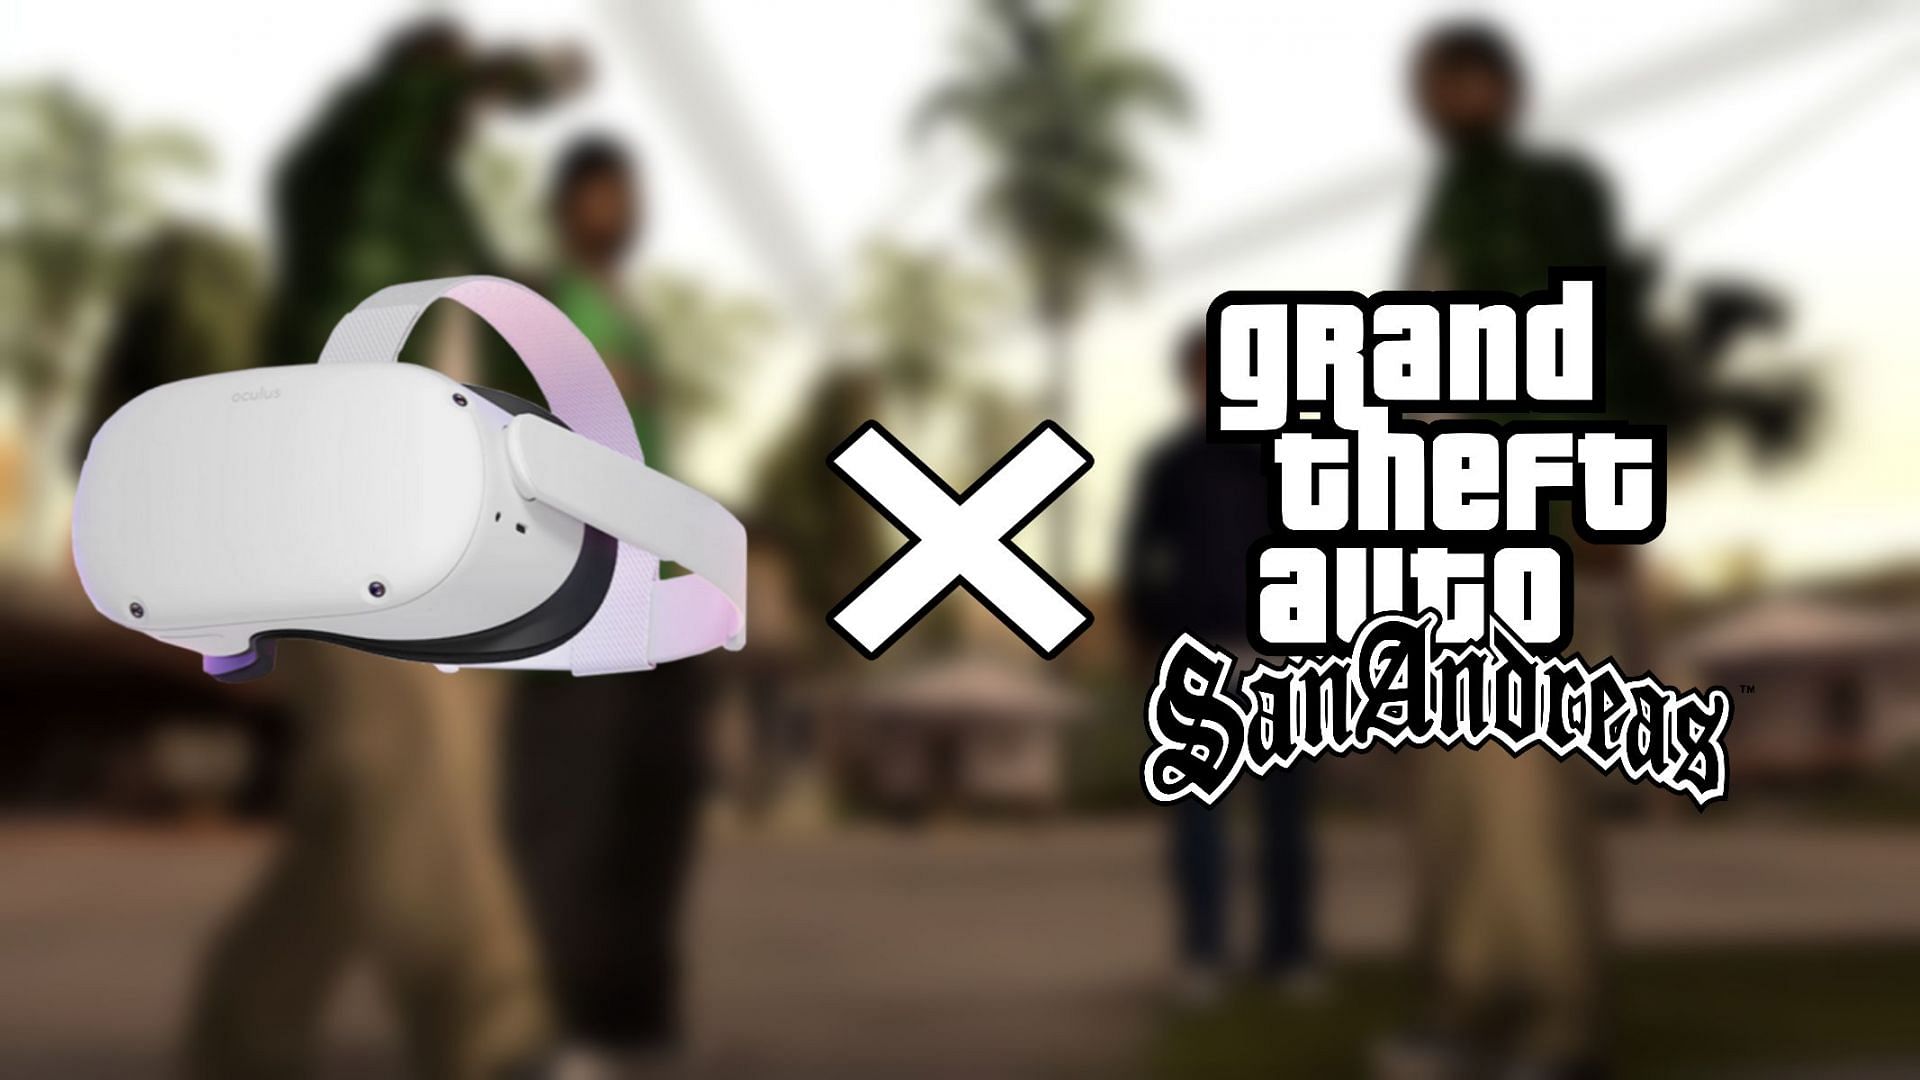 GTA San Andreas was announced to be on the Oculus Quest 2 recently (Image via Sportskeeda)